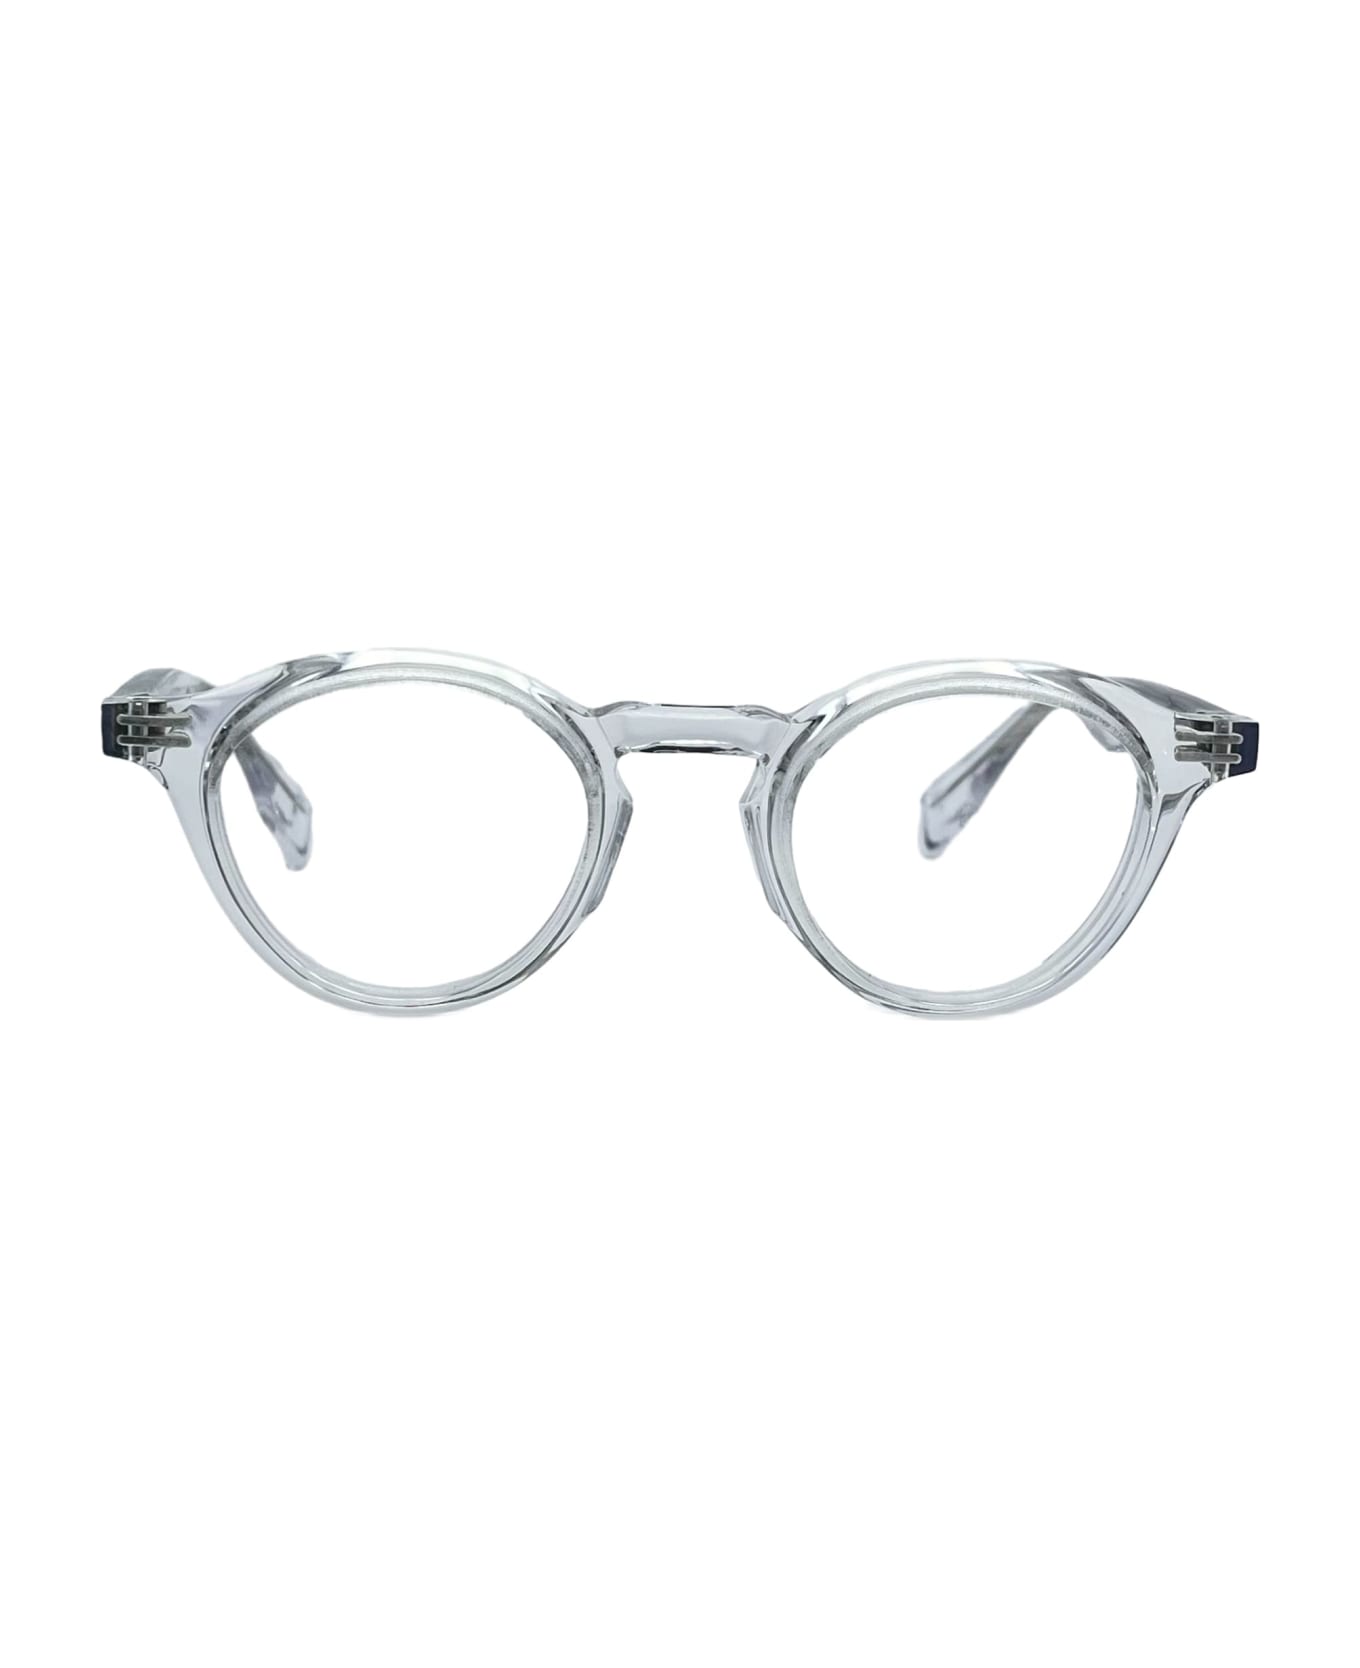 FACTORY900 Rf-019 - 827 Glasses - crystal clear アイウェア